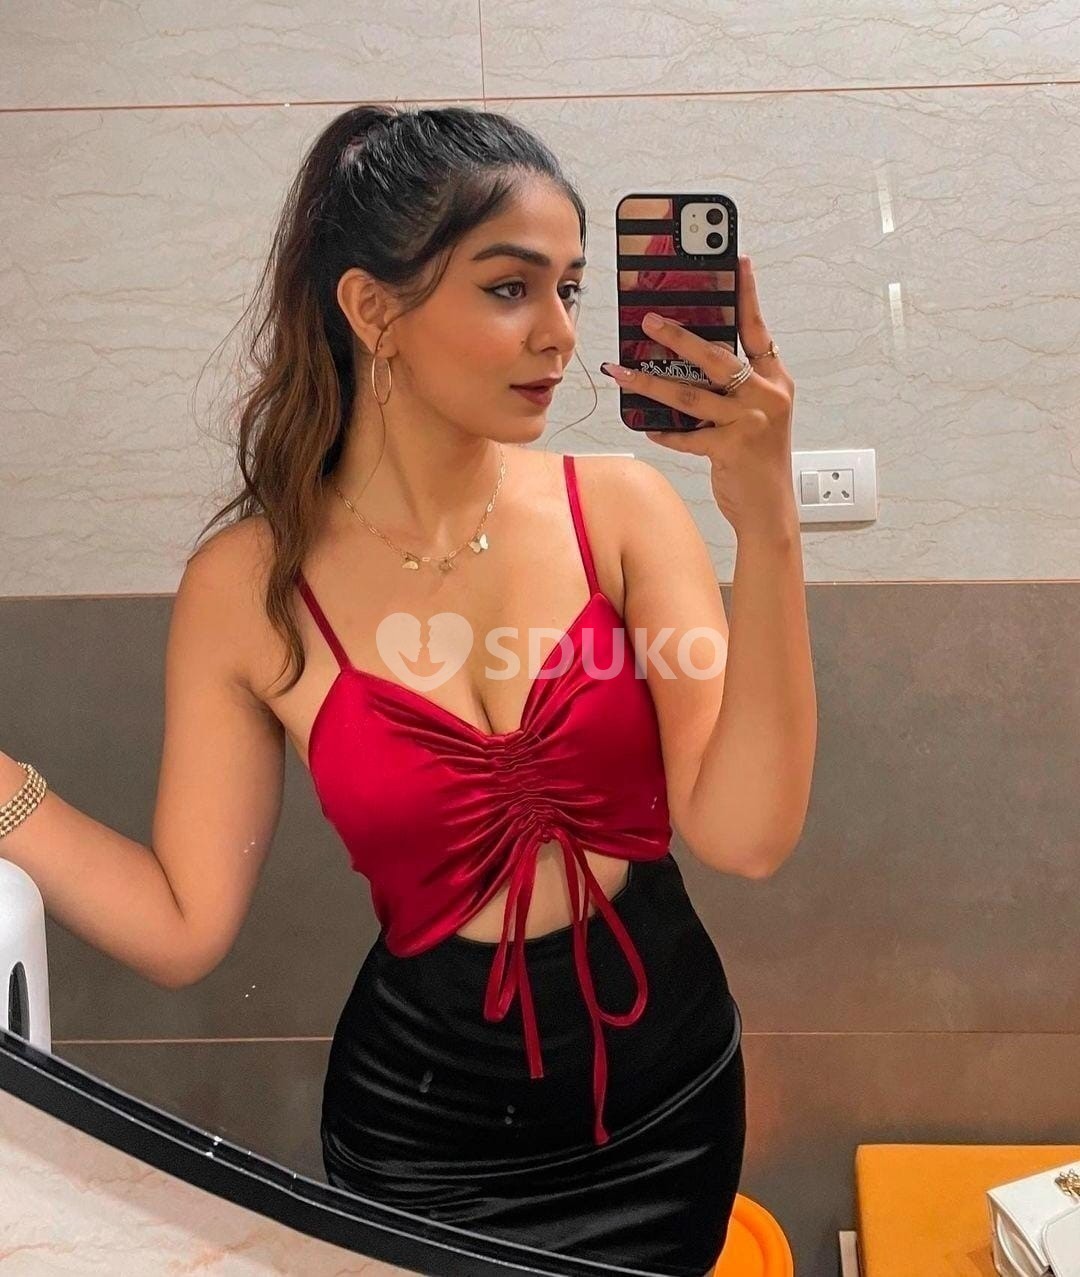 FARIDKOT 💎 AMISHA INDIPENDENT CALL GIRL SERVICE IN & OUTCALL 🇮🇳TRUST